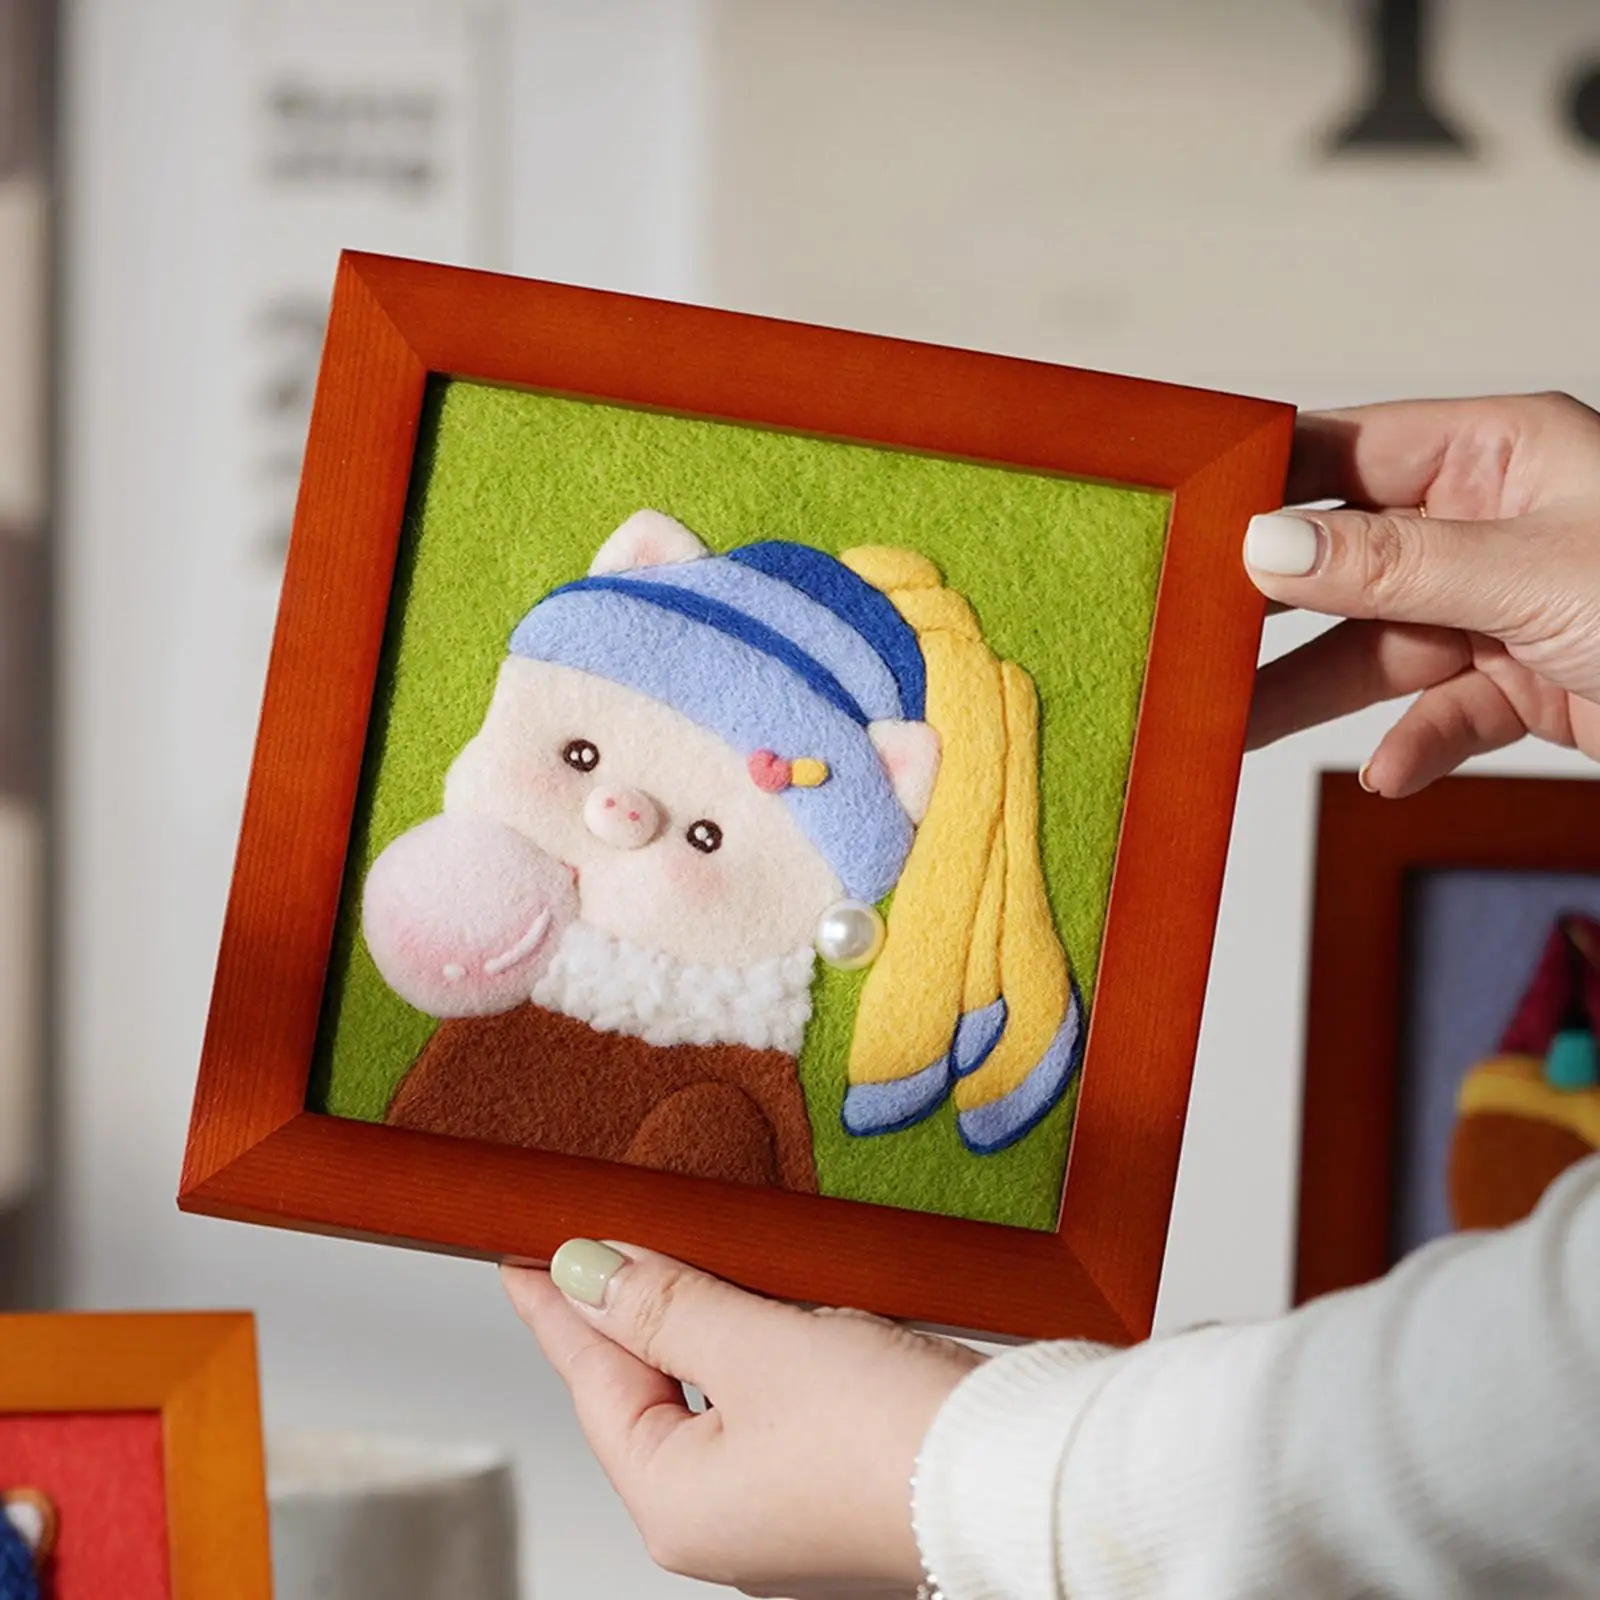 Wool Needle Felting Kit Gift DIY Decor with Photo Frame Set Painting Cute Supplies for Starter Holiday Children Friends Home